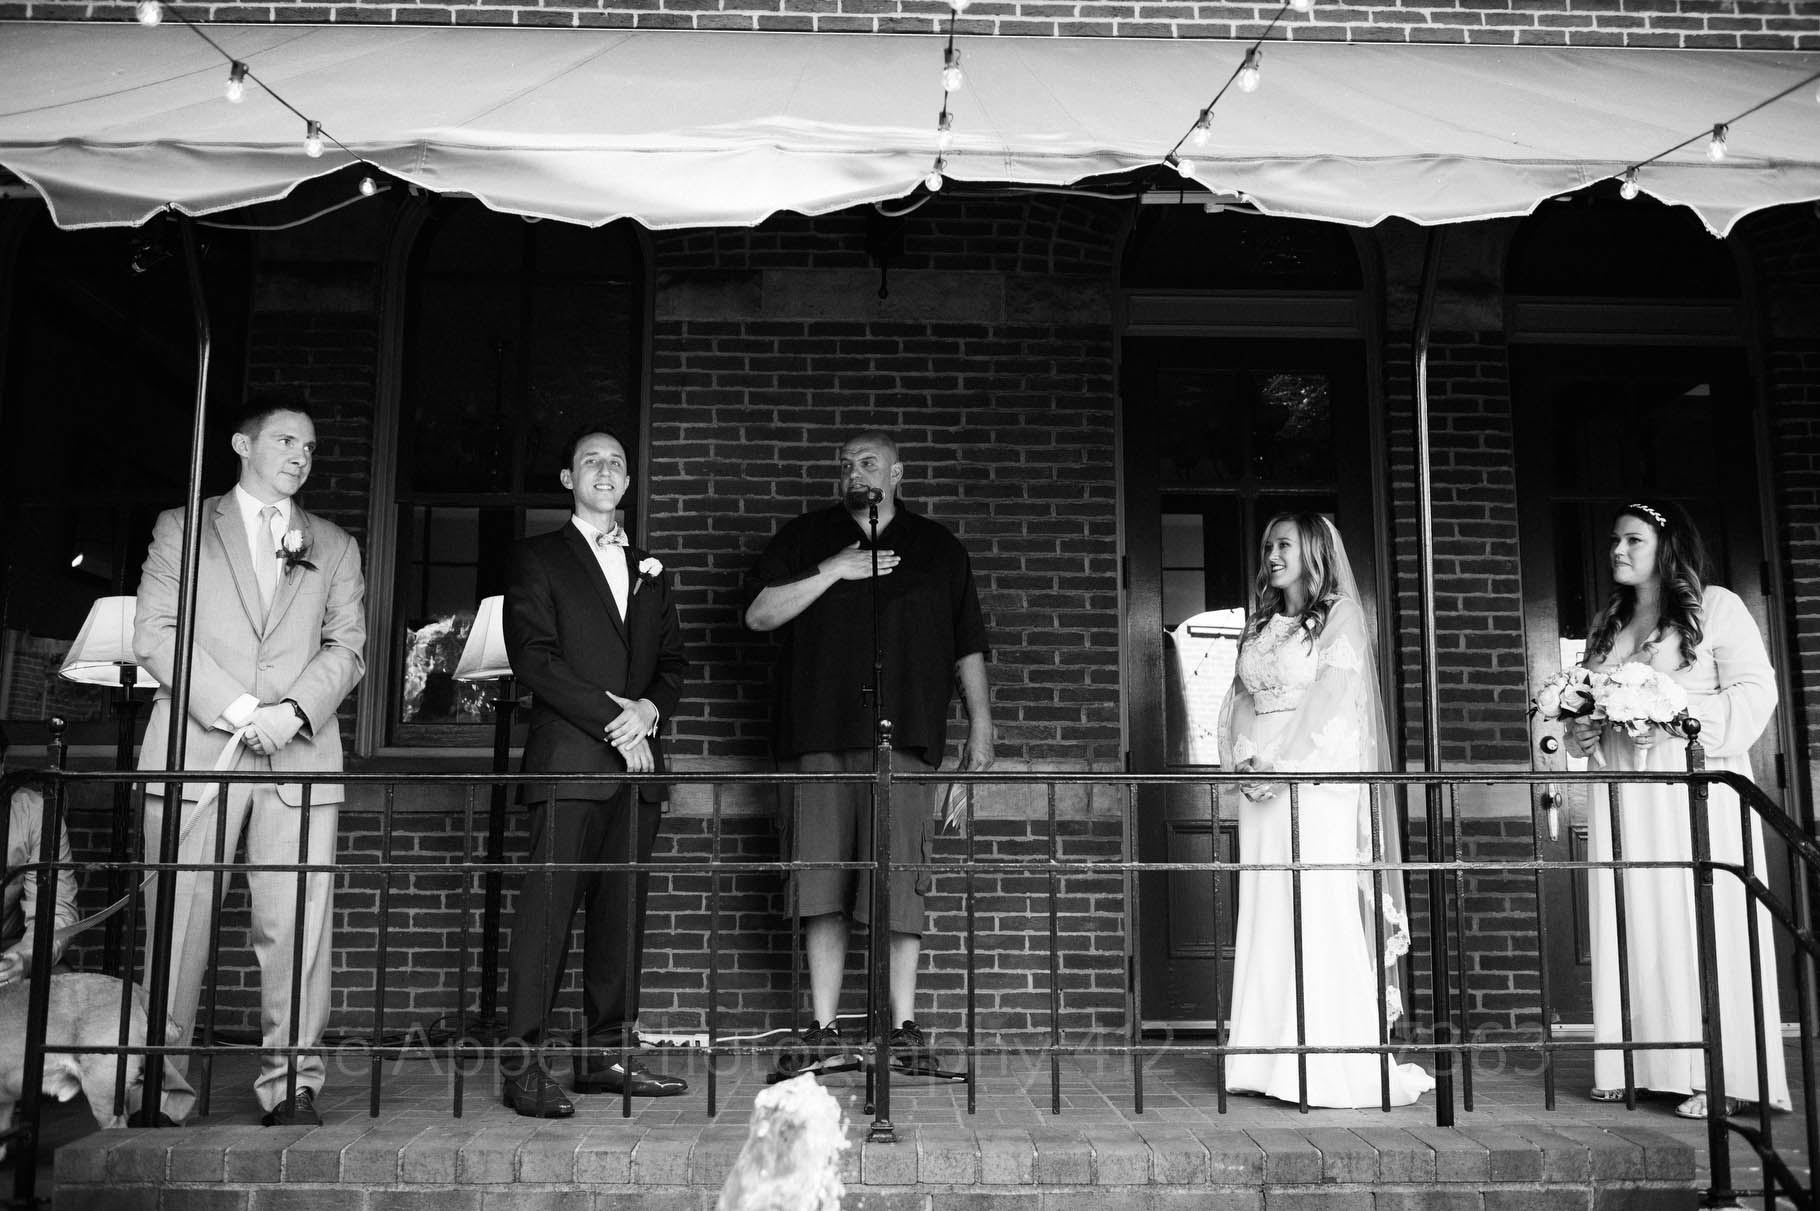 Braddock PA mayor John Fetterman addresses the audience gathered for a wedding. The bridal party stands on a porch beneath an awning.